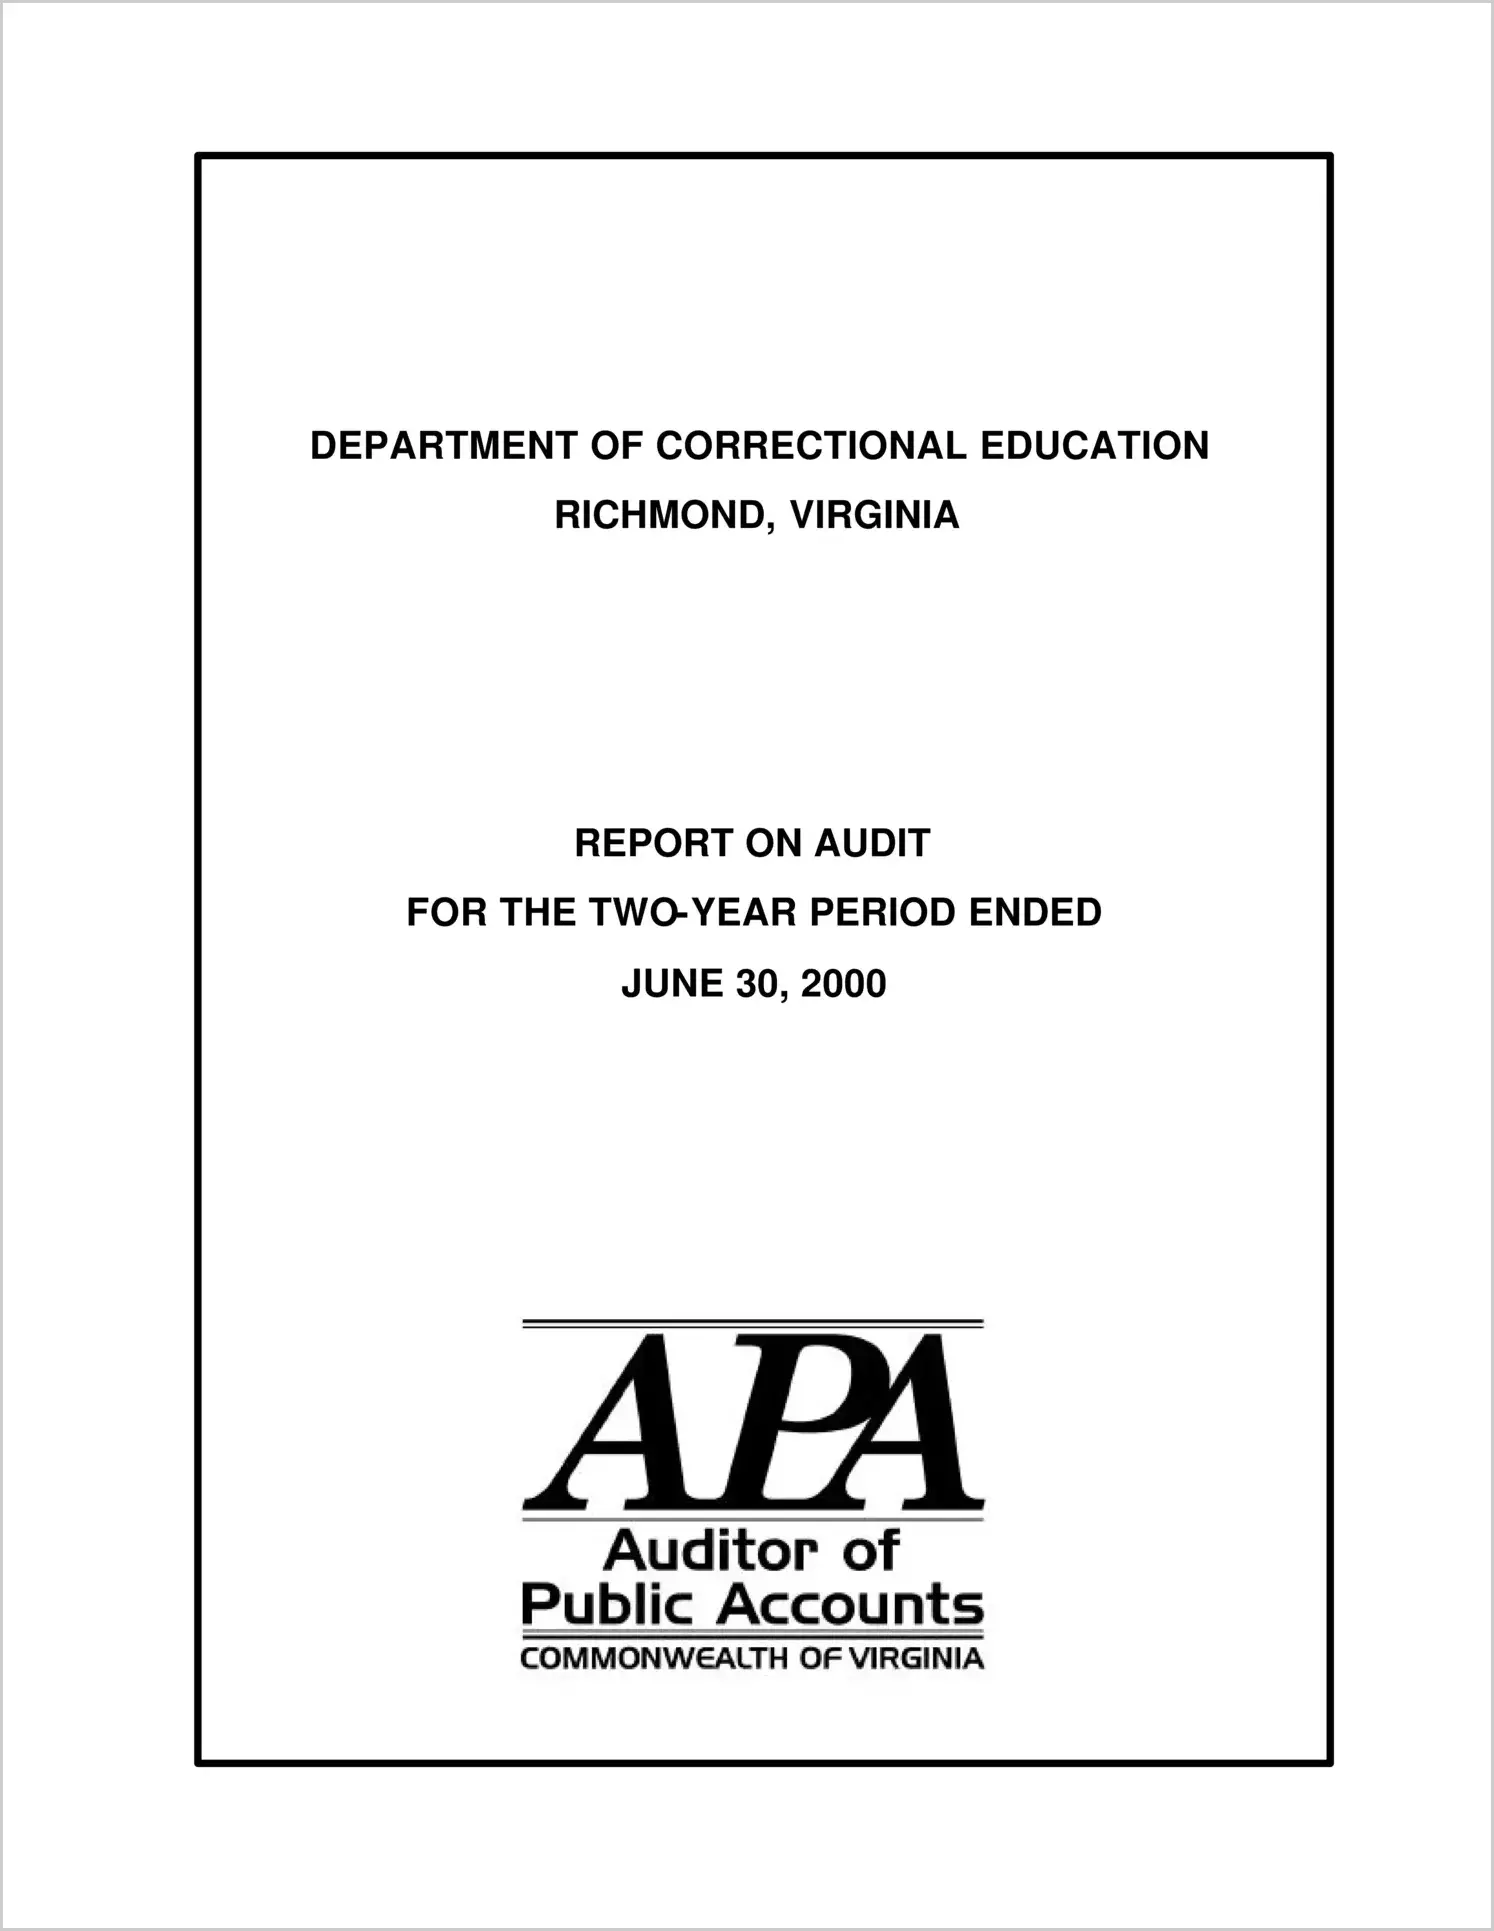 Department of Correctional Education for the two-year period ended June 30, 2000